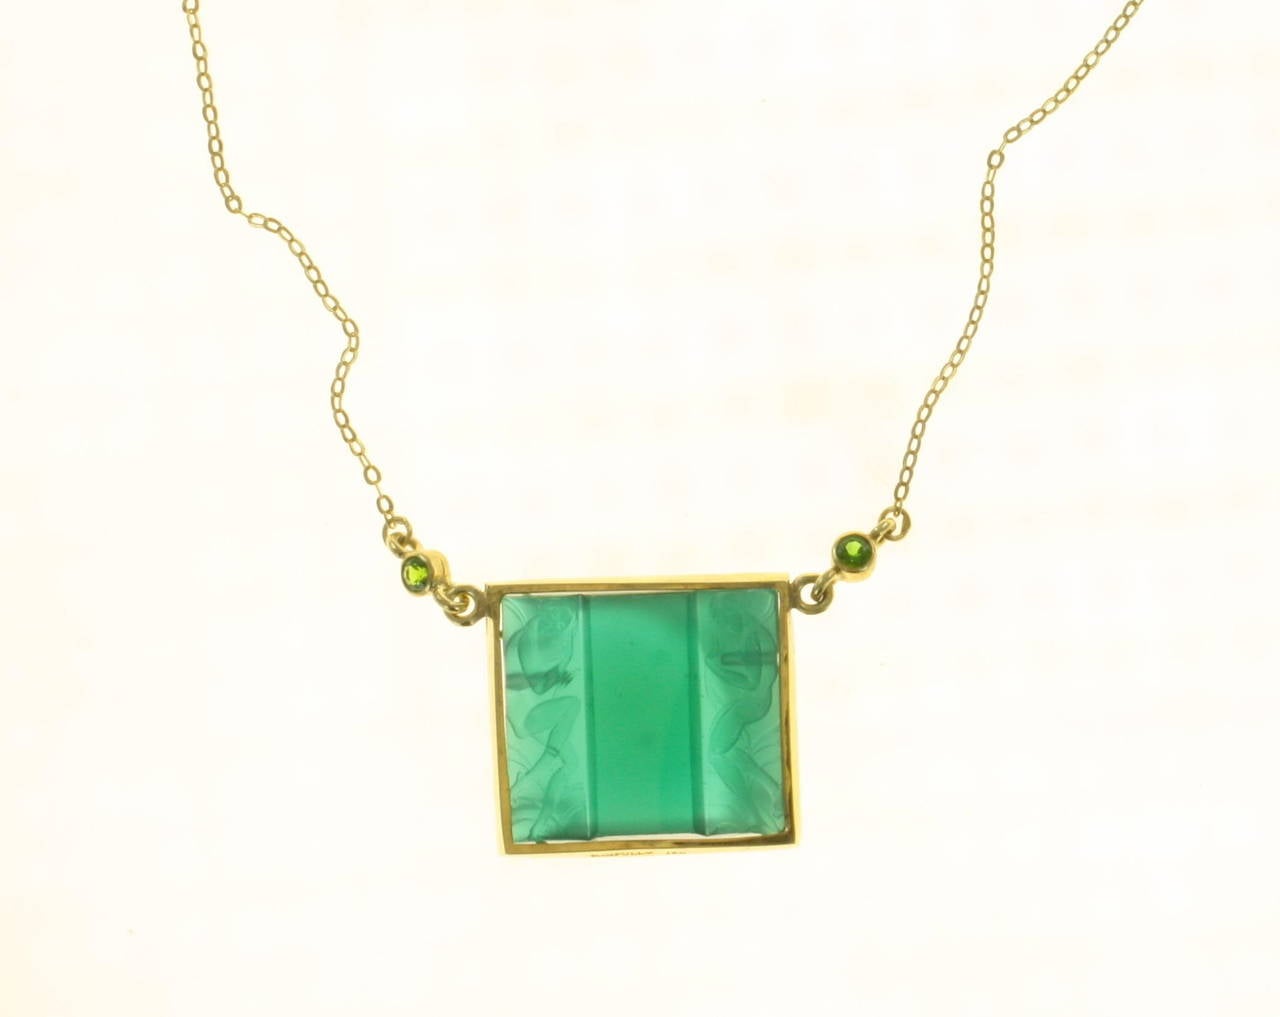 Original Antique Art Deco Emerald green glass pendant set in 18kt gold with
two round cut Emeralds
Chain measures 16 1/2 inches
Center glass panel measures 1 inch by 3/4 inch